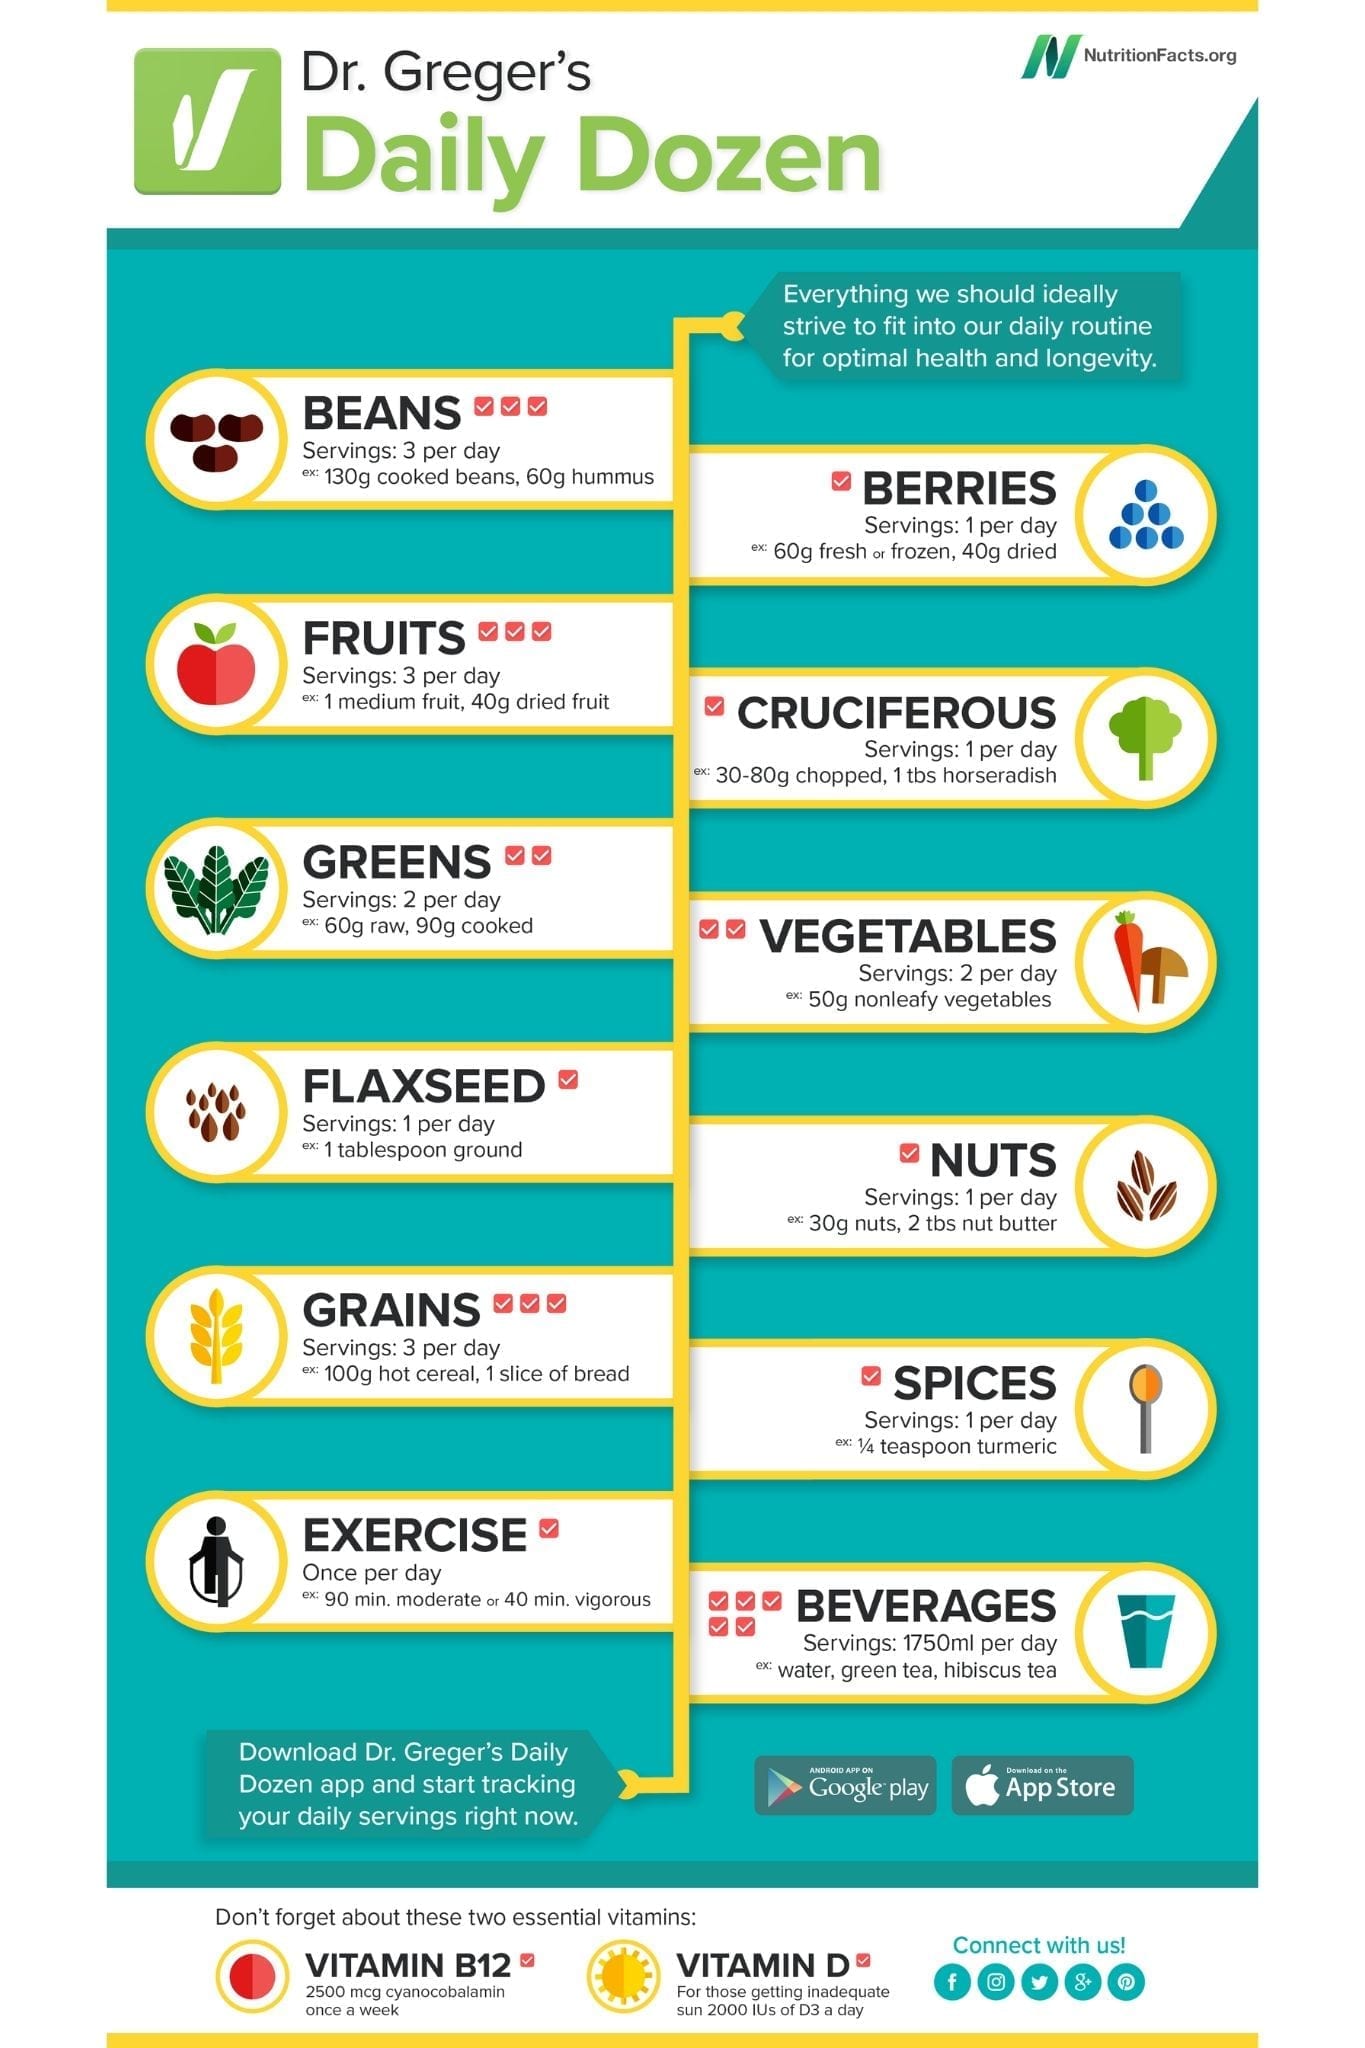 What are the healthiest foods and how much should you eat daily? Check out Dr. Greger’s Daily Dozen checklist and Traffic Light system to benefit the most from your plant-based diet.